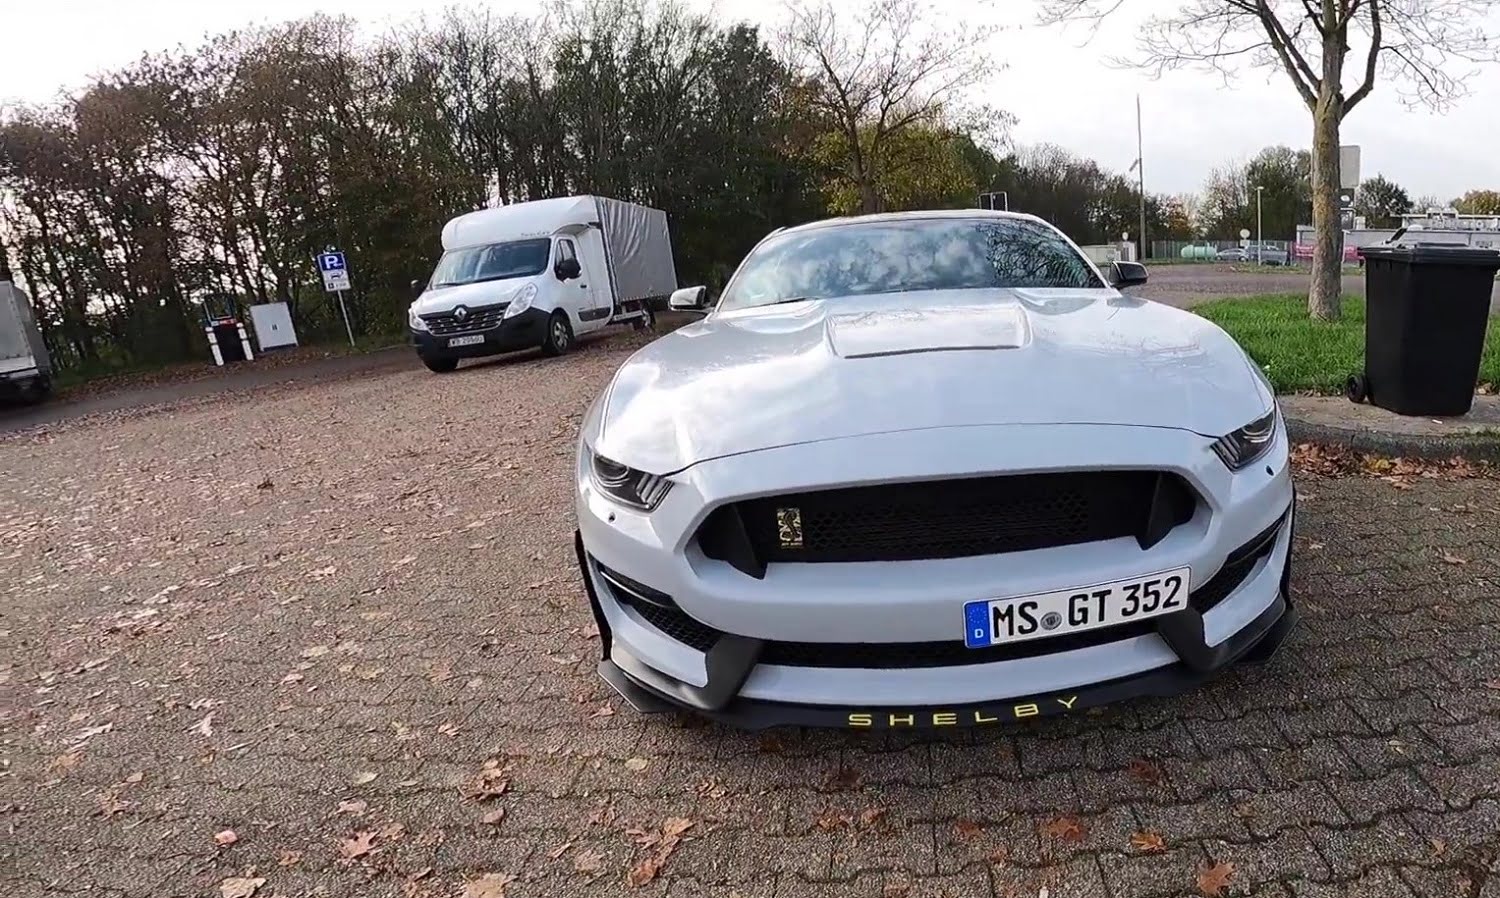 temperament eksplicit Rustik 2020 Ford Mustang Shelby GT350 Hits 170 MPH On Autobahn: Video